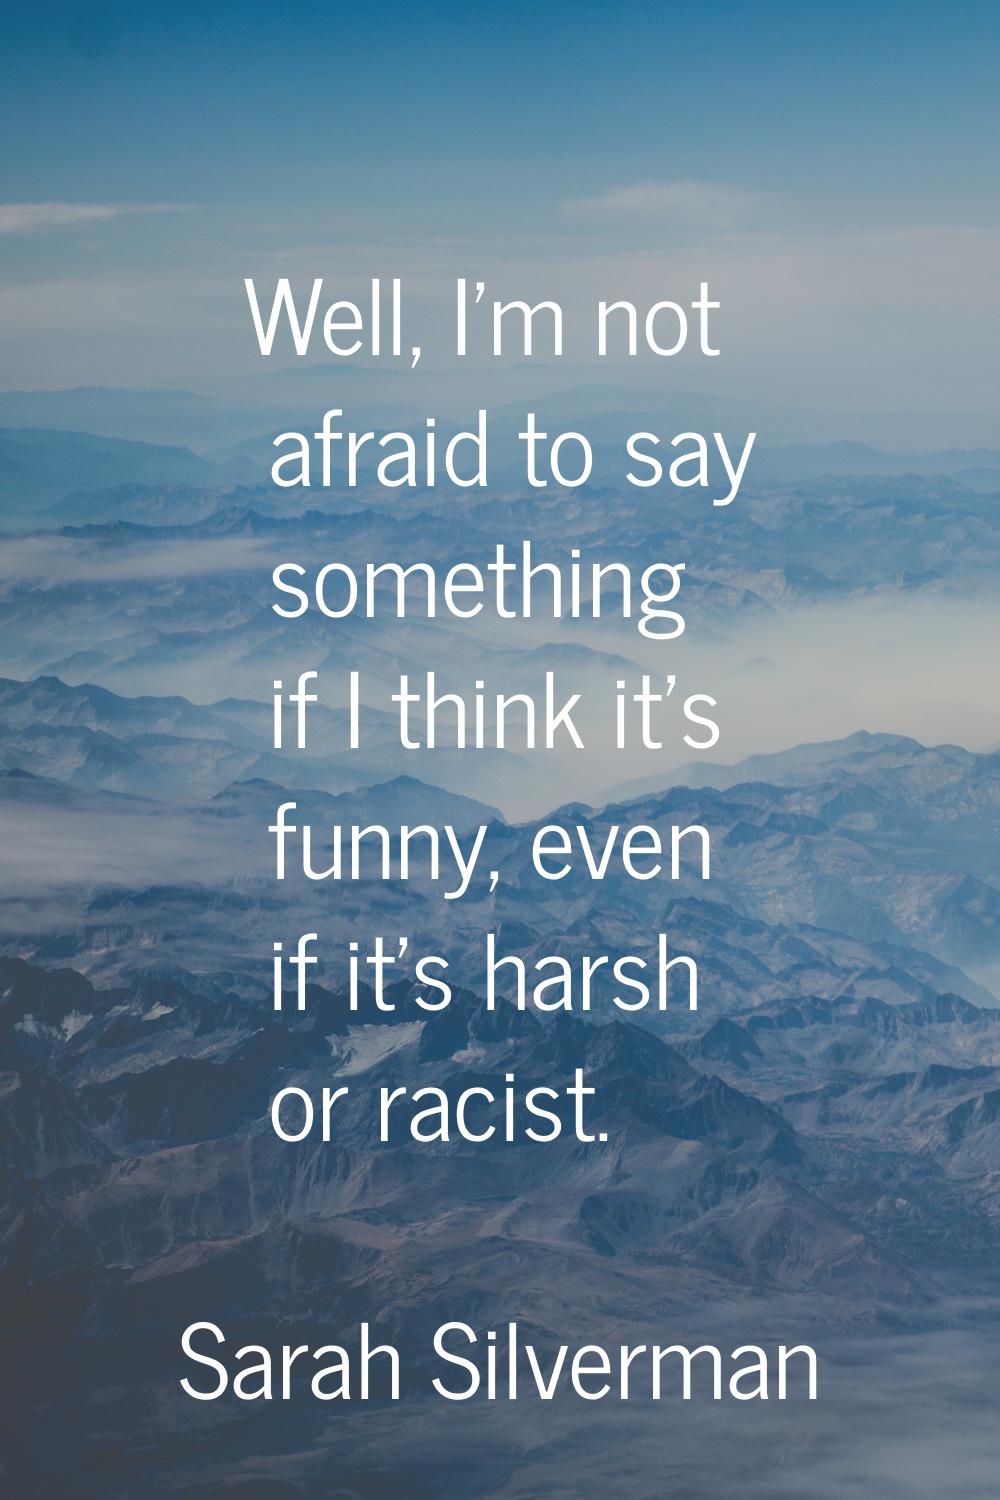 Well, I'm not afraid to say something if I think it's funny, even if it's harsh or racist.